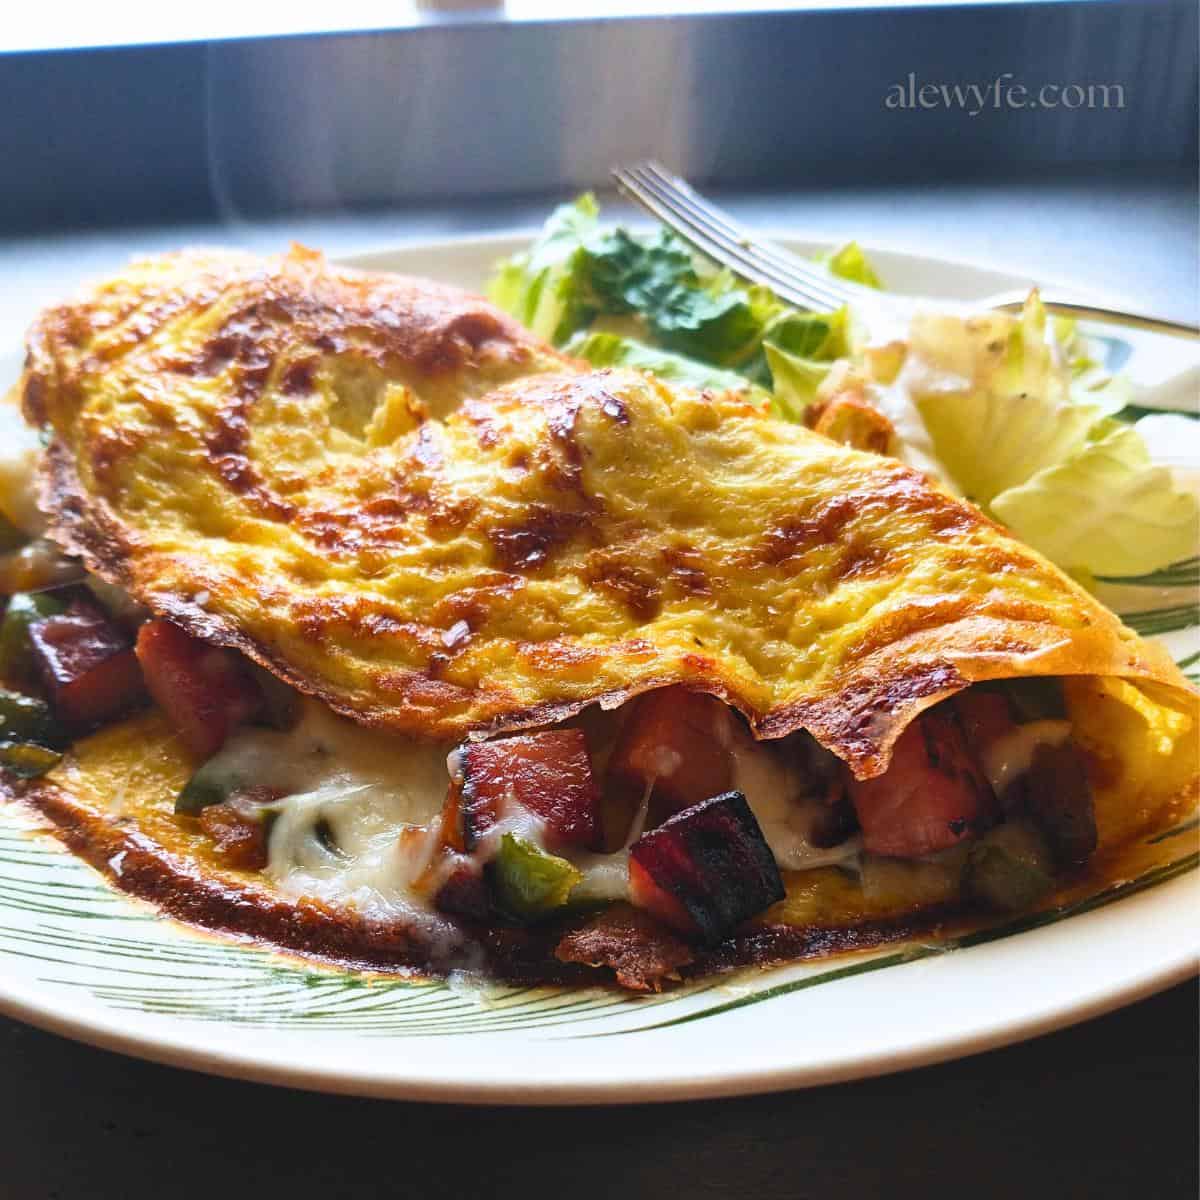 side angle view of a plated denver omelette with golden brown edges, diced ham, peppers, and melted cheese, on a plate with a small green salad.